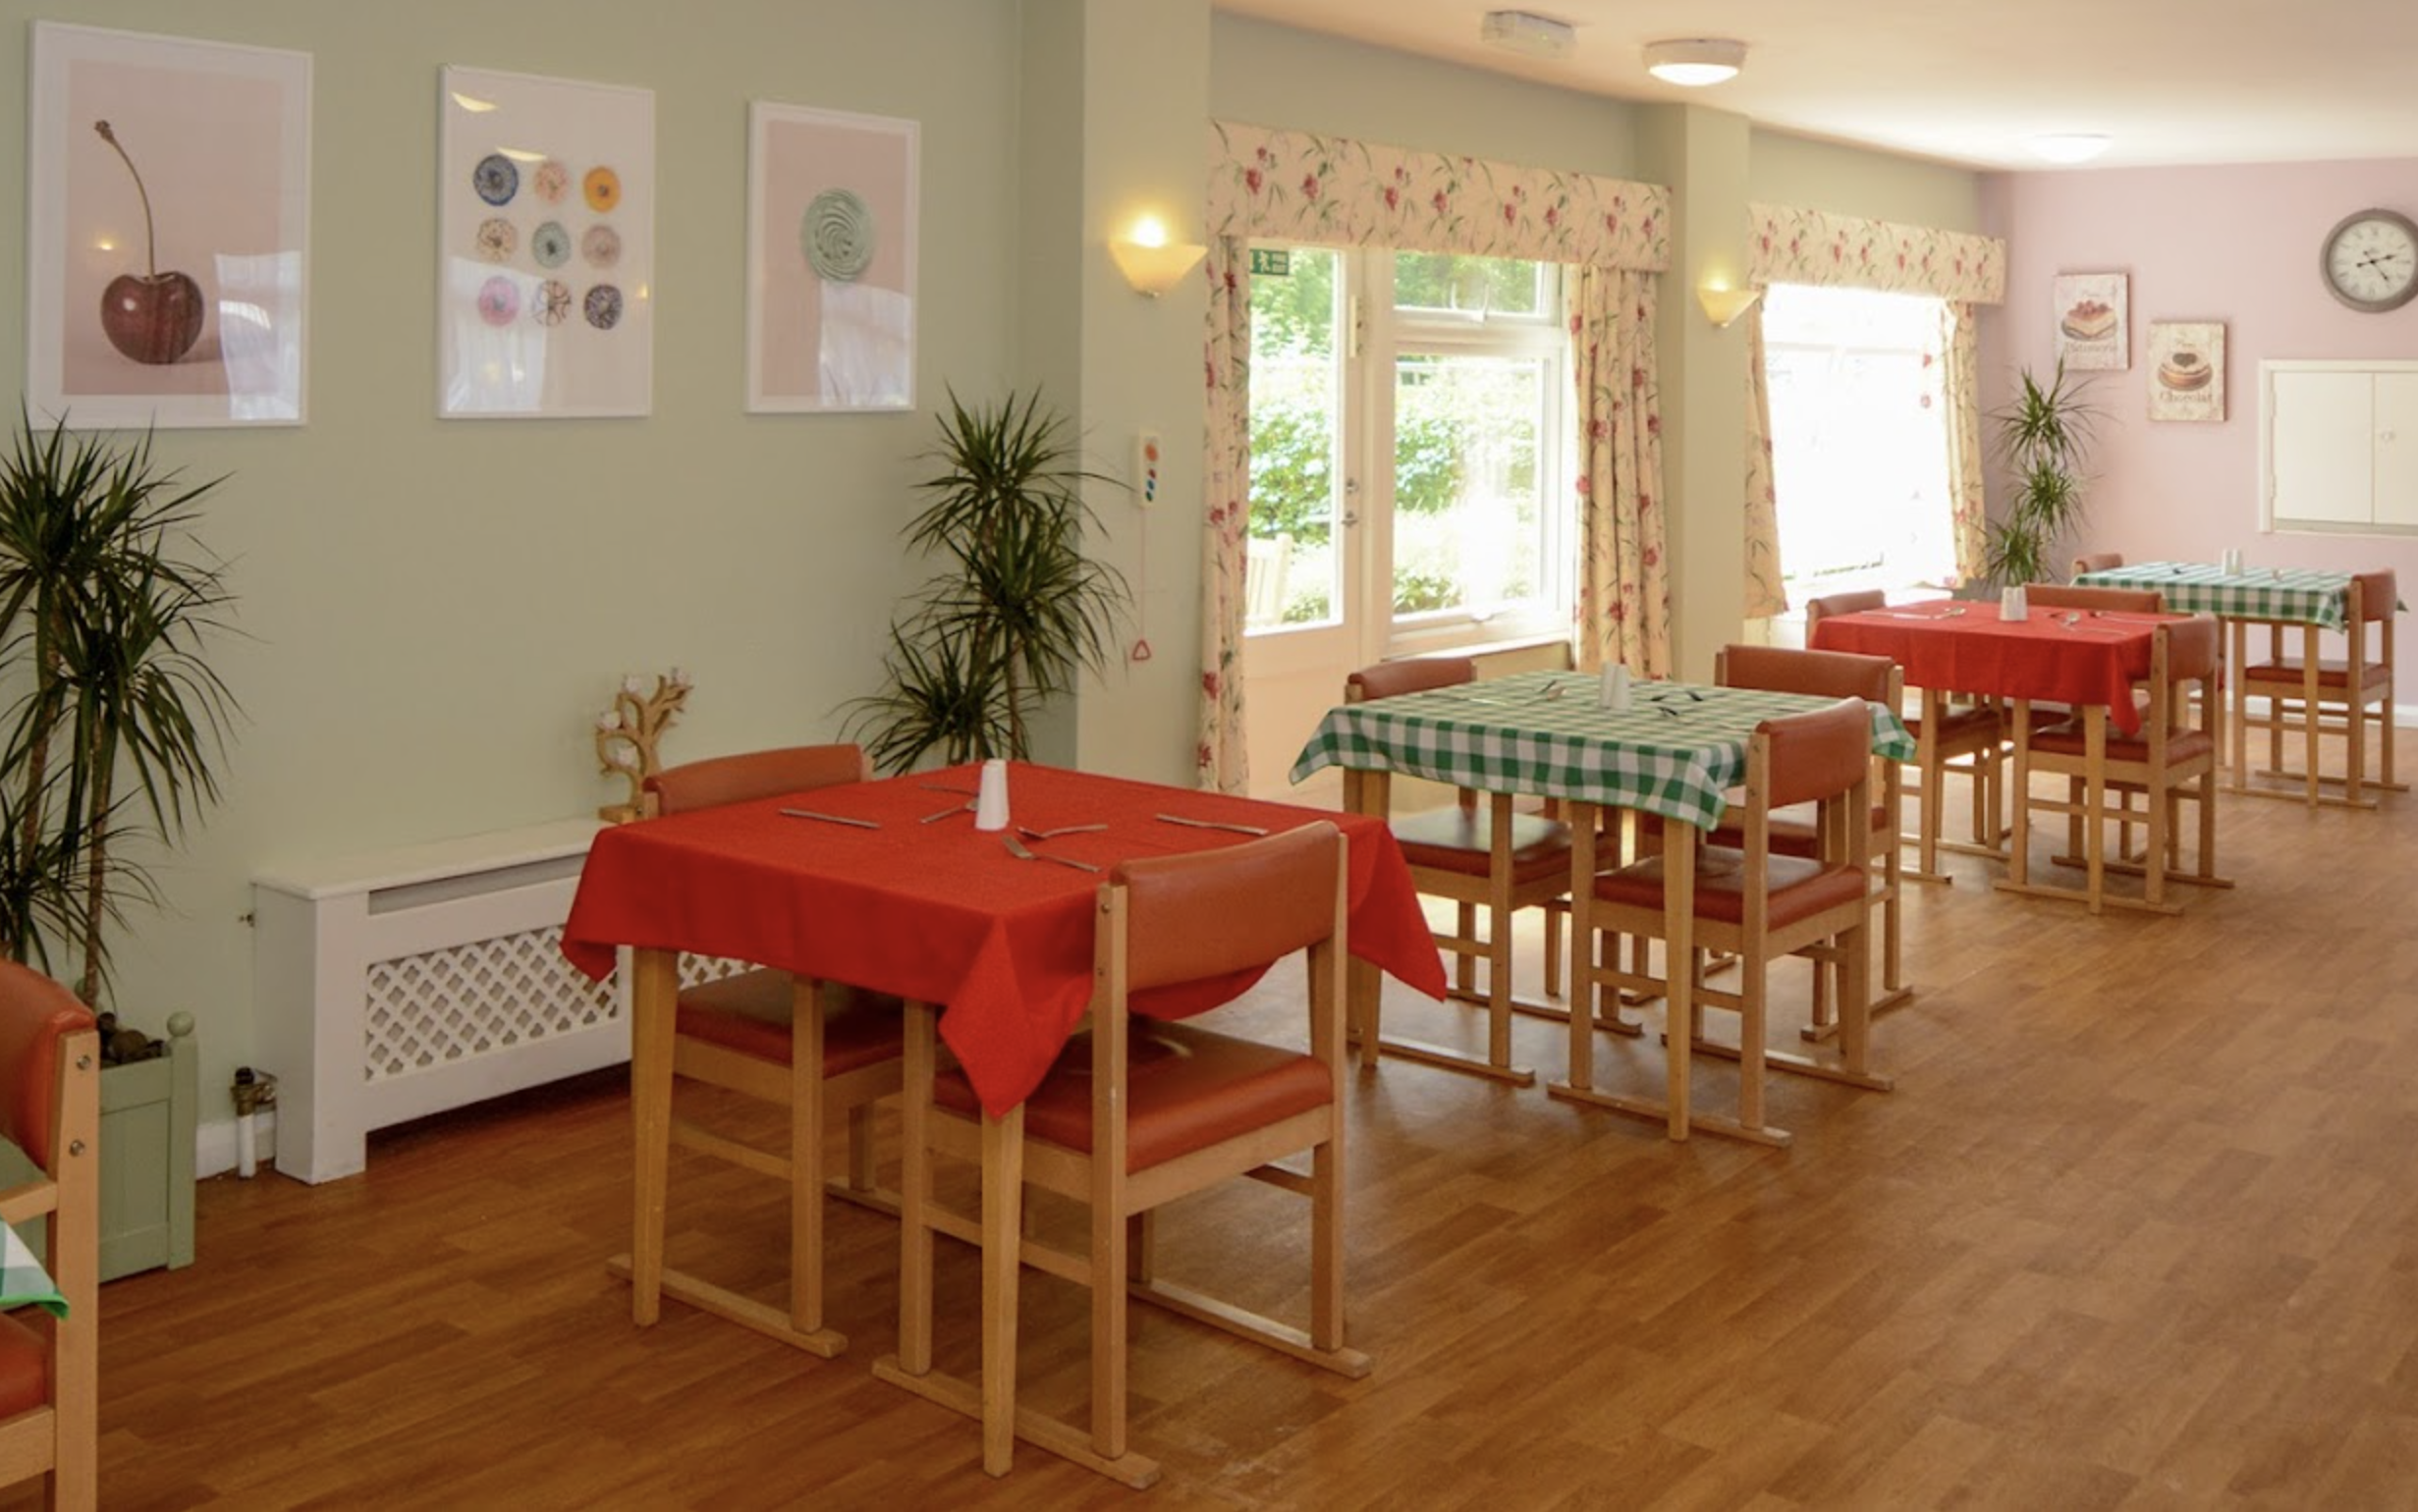 Dining room of Elizabeth House care home in Poole, Hampshire